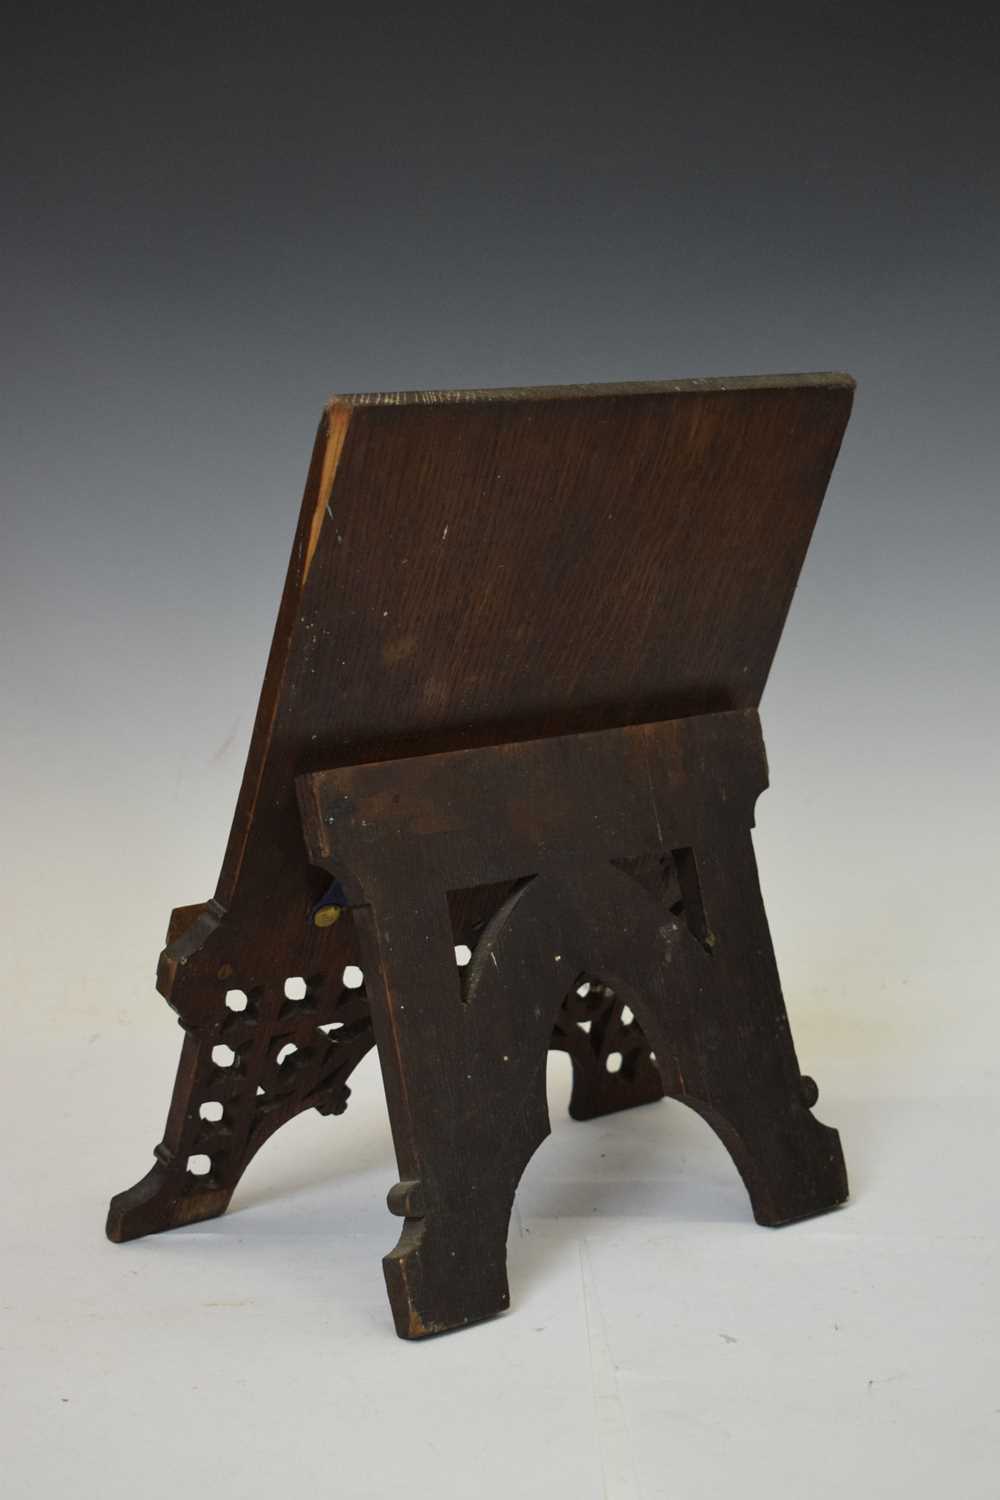 Victorian Gothic revival oak table top reading stand - Image 7 of 8